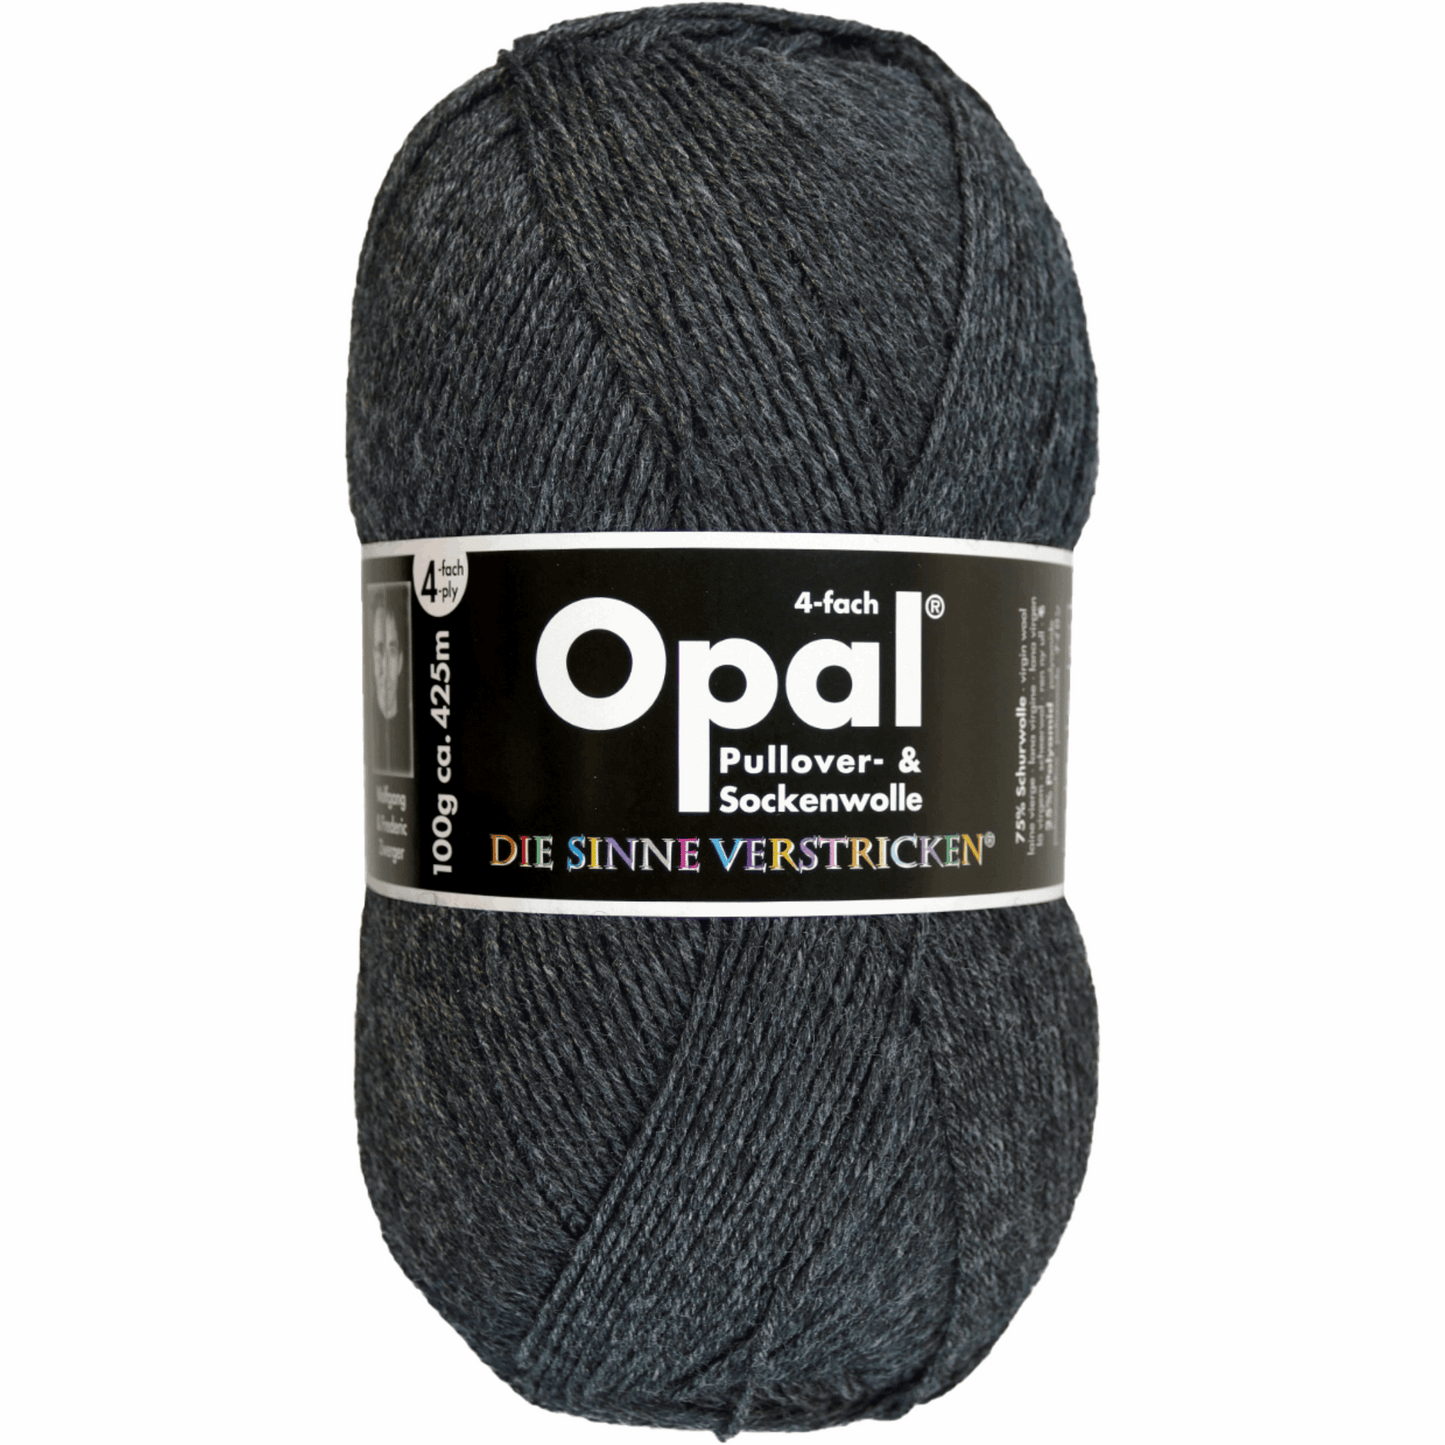 Opal plain 4 threads. 100g 2011/12, 97760, color anthracite 5191